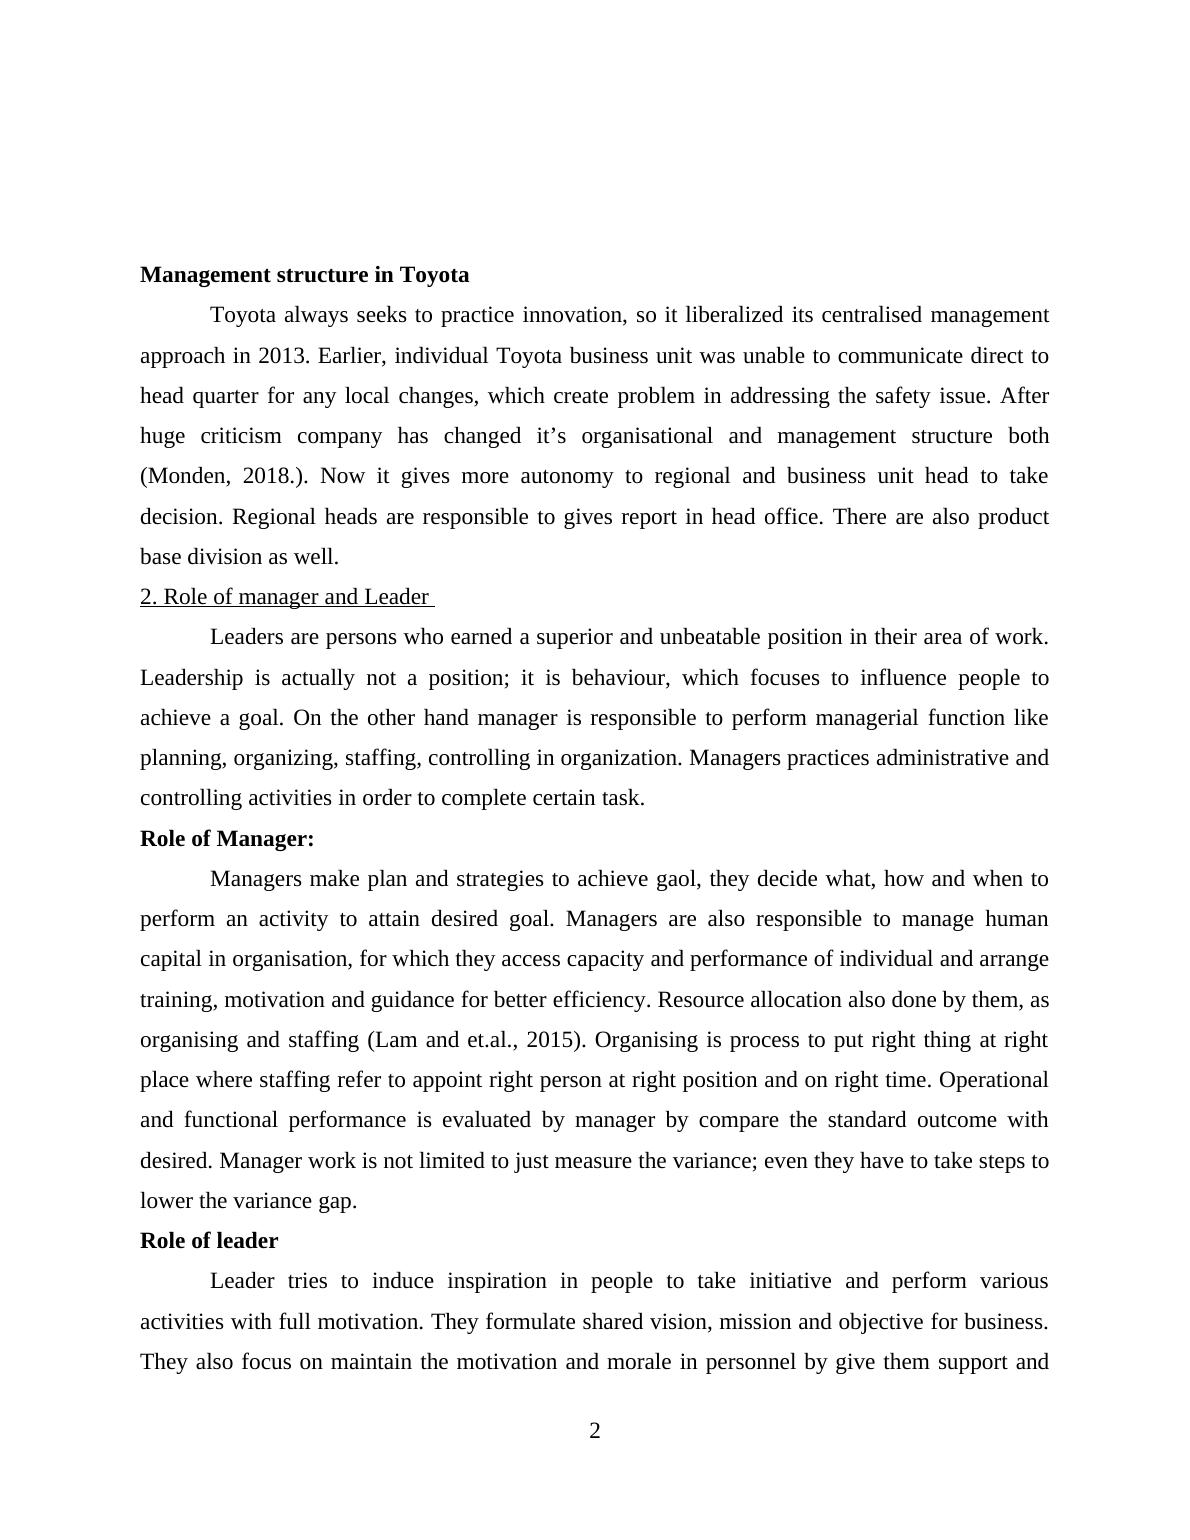 Management & operations Assignment | Toyota_4